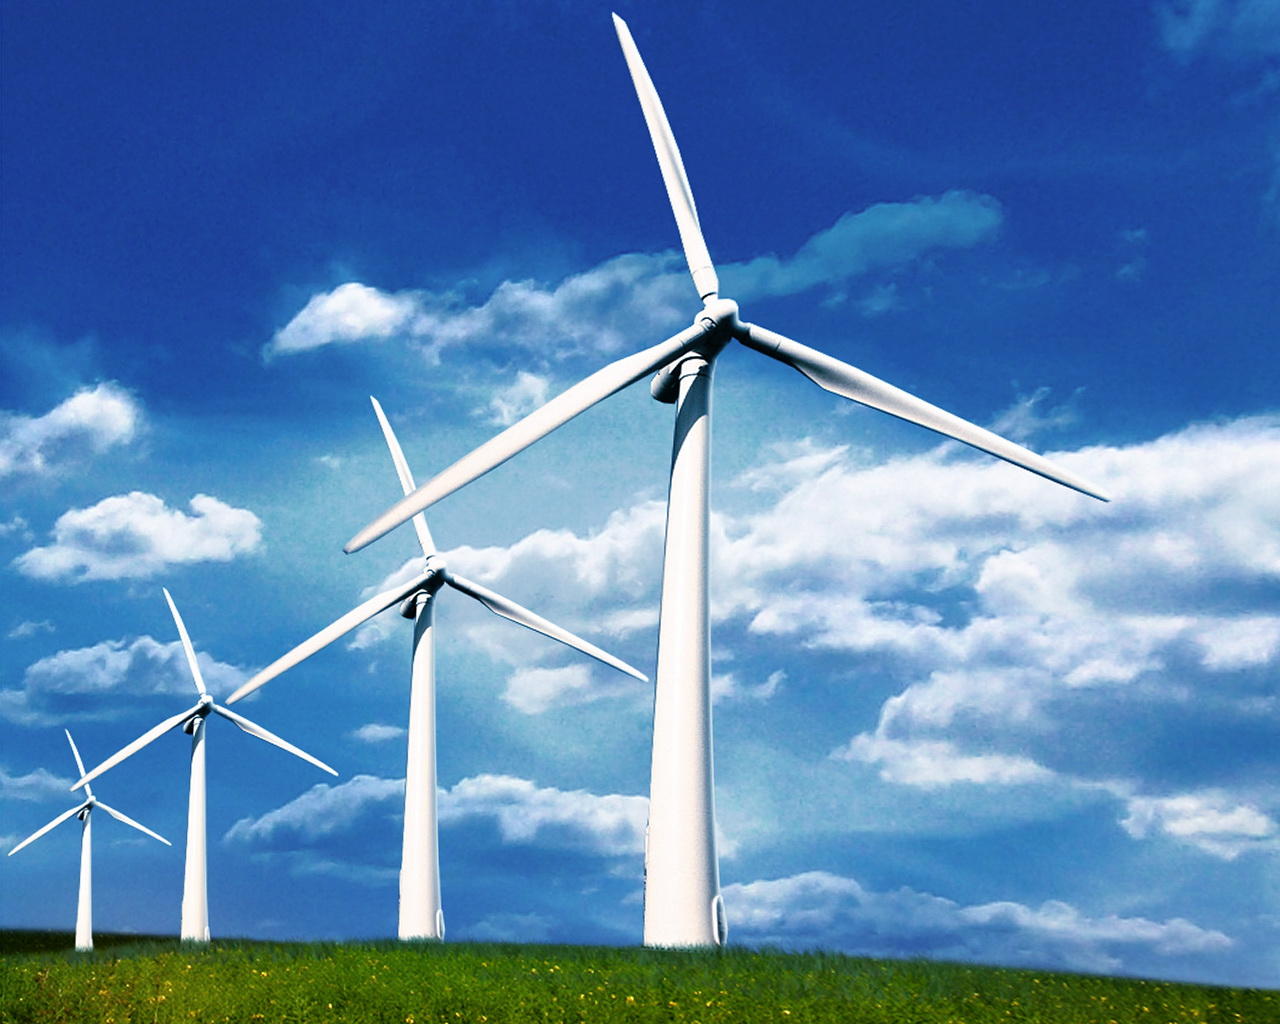 Wind power production tripled